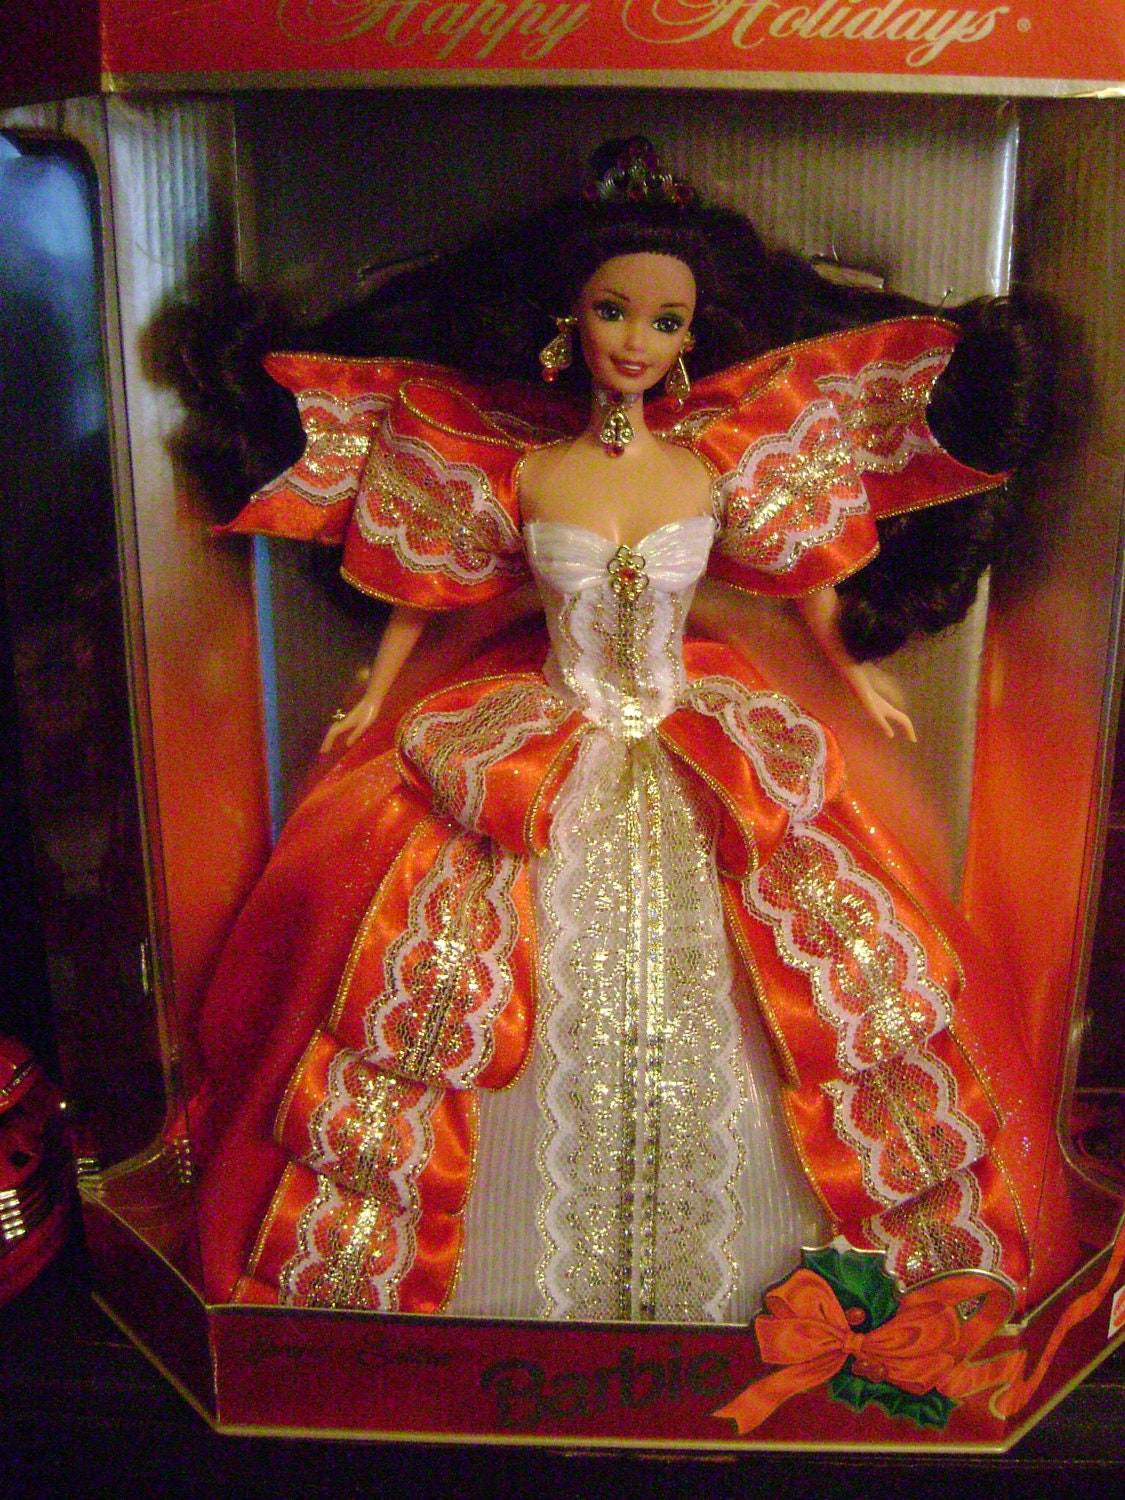 collectible-barbie-represents-holidays-i-antique-online